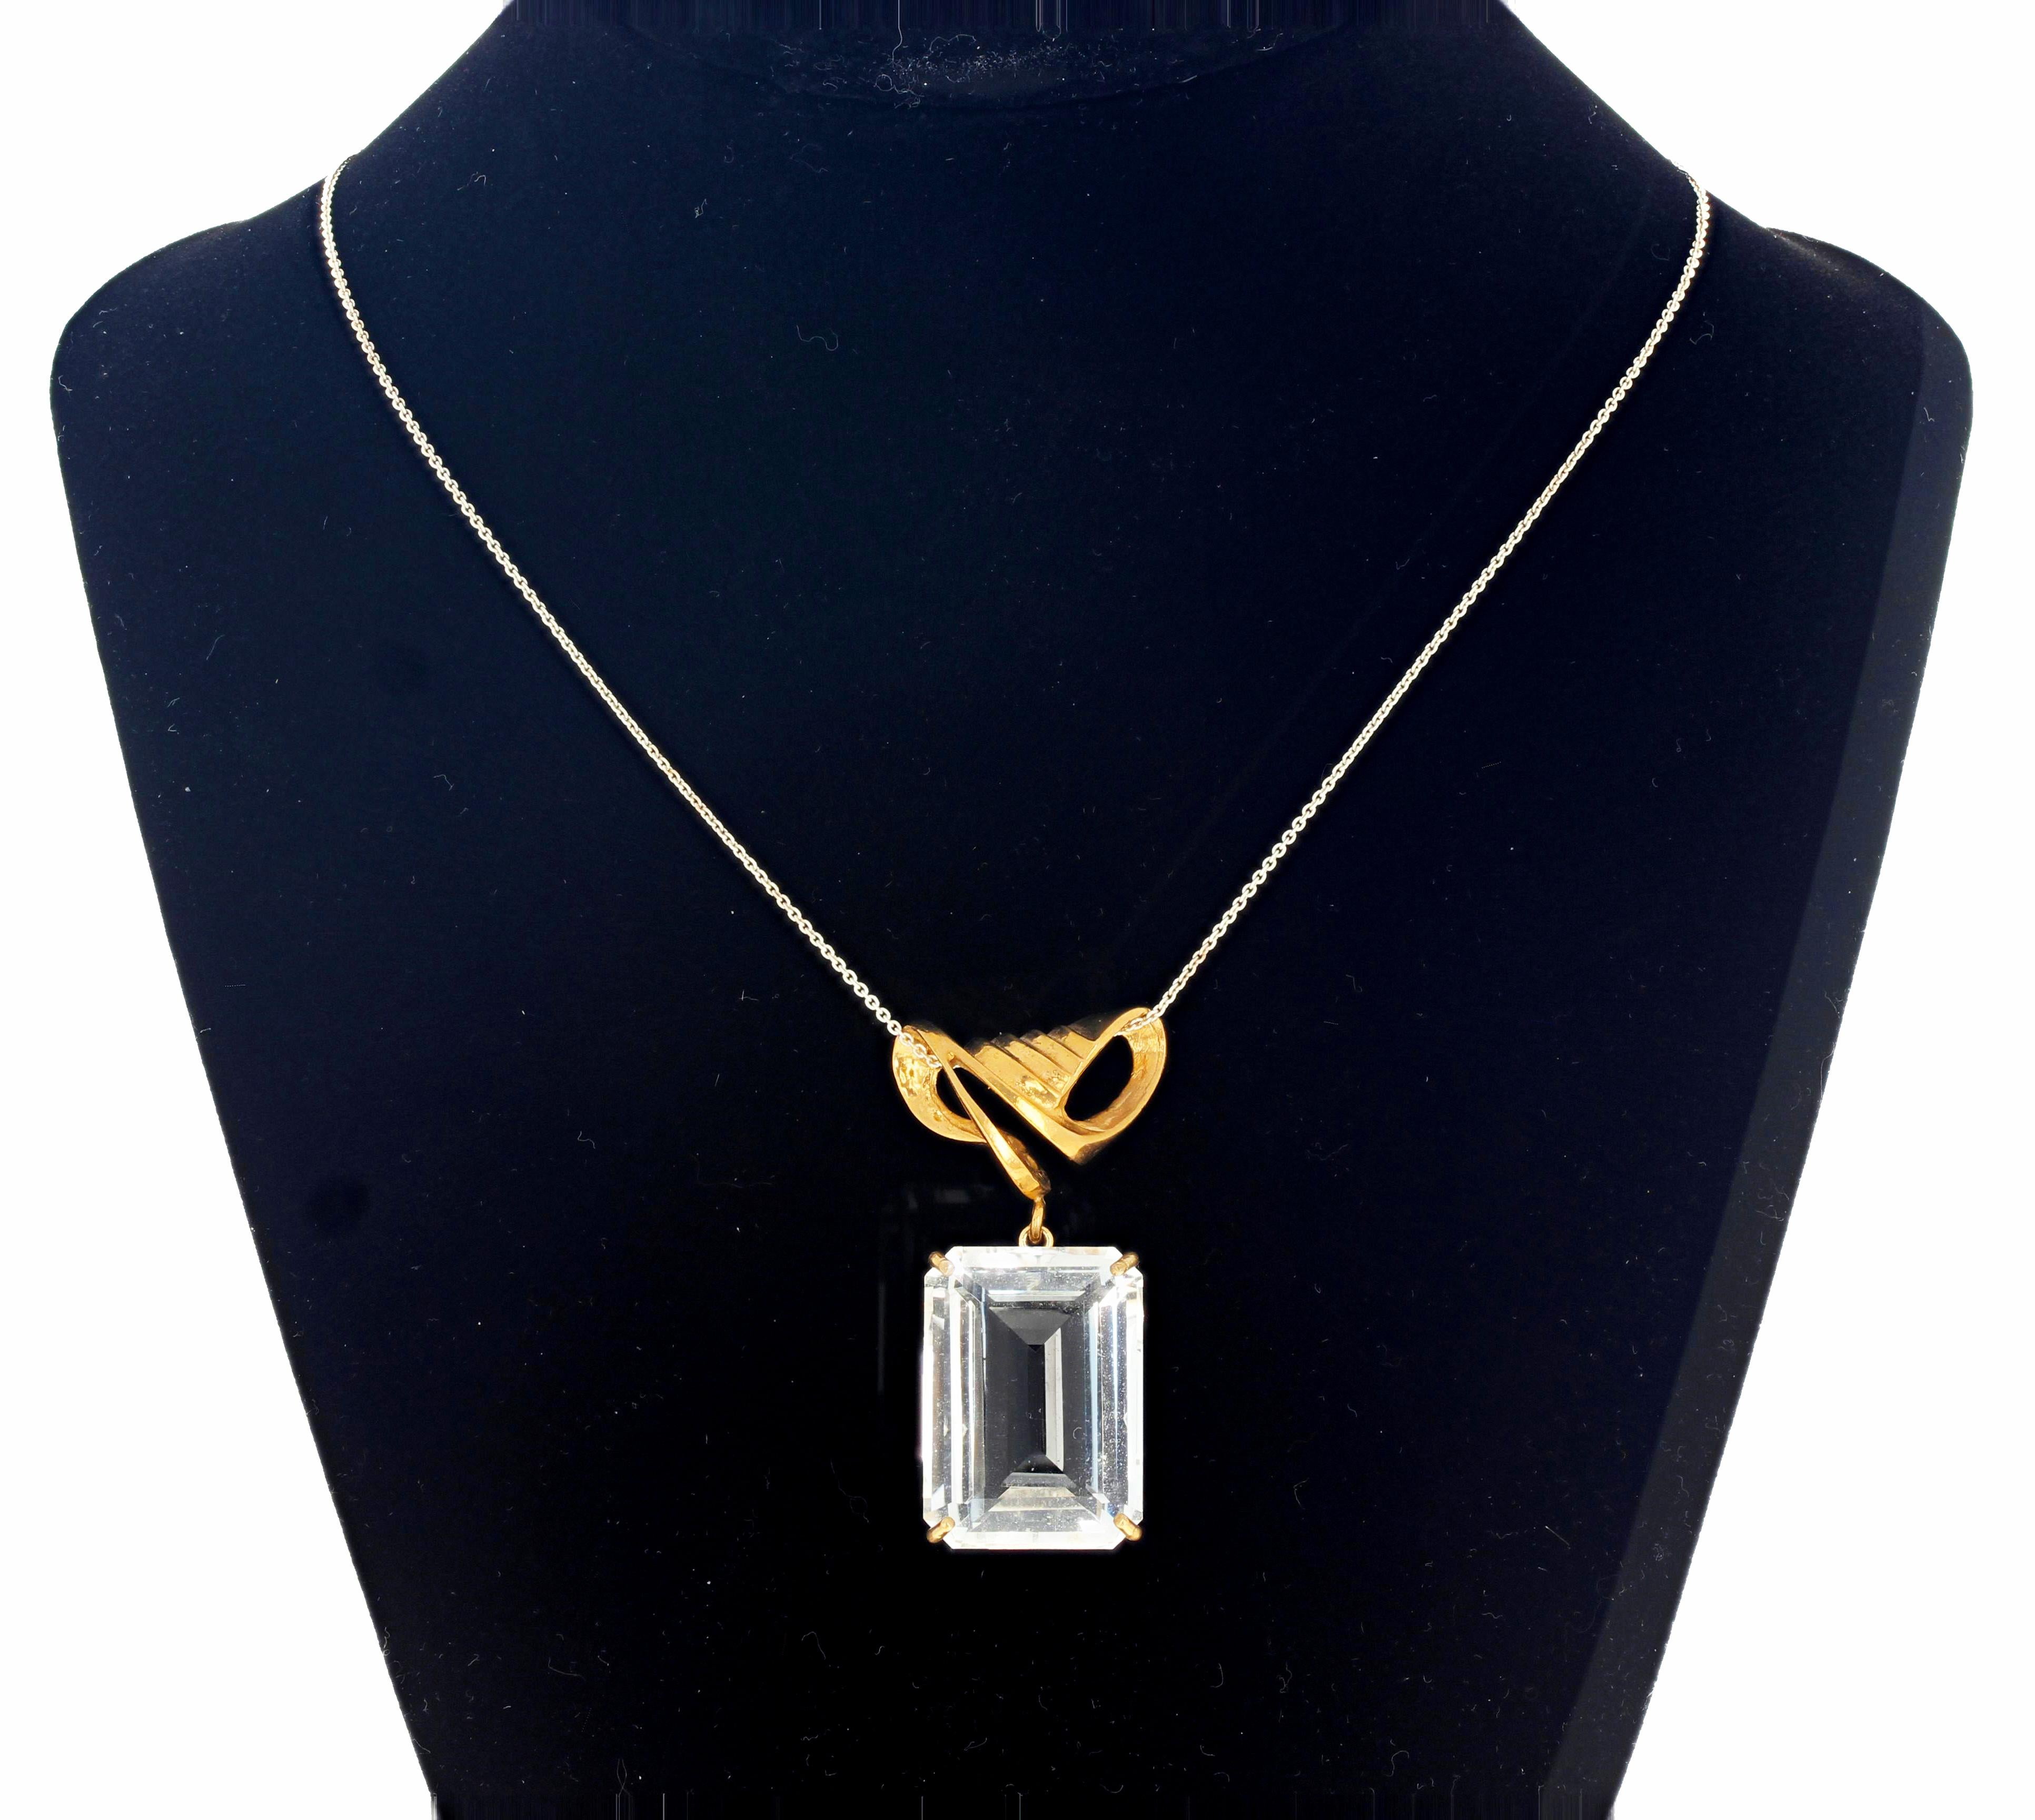 This superbly elegant style magnificent large solitaire Goshenite 14K yellow gold pendant measure a whopping 18 mm x 25 mm and is 33 carats.   Its too clear to photograph so although it looks greyish it is clear white transparently translucently